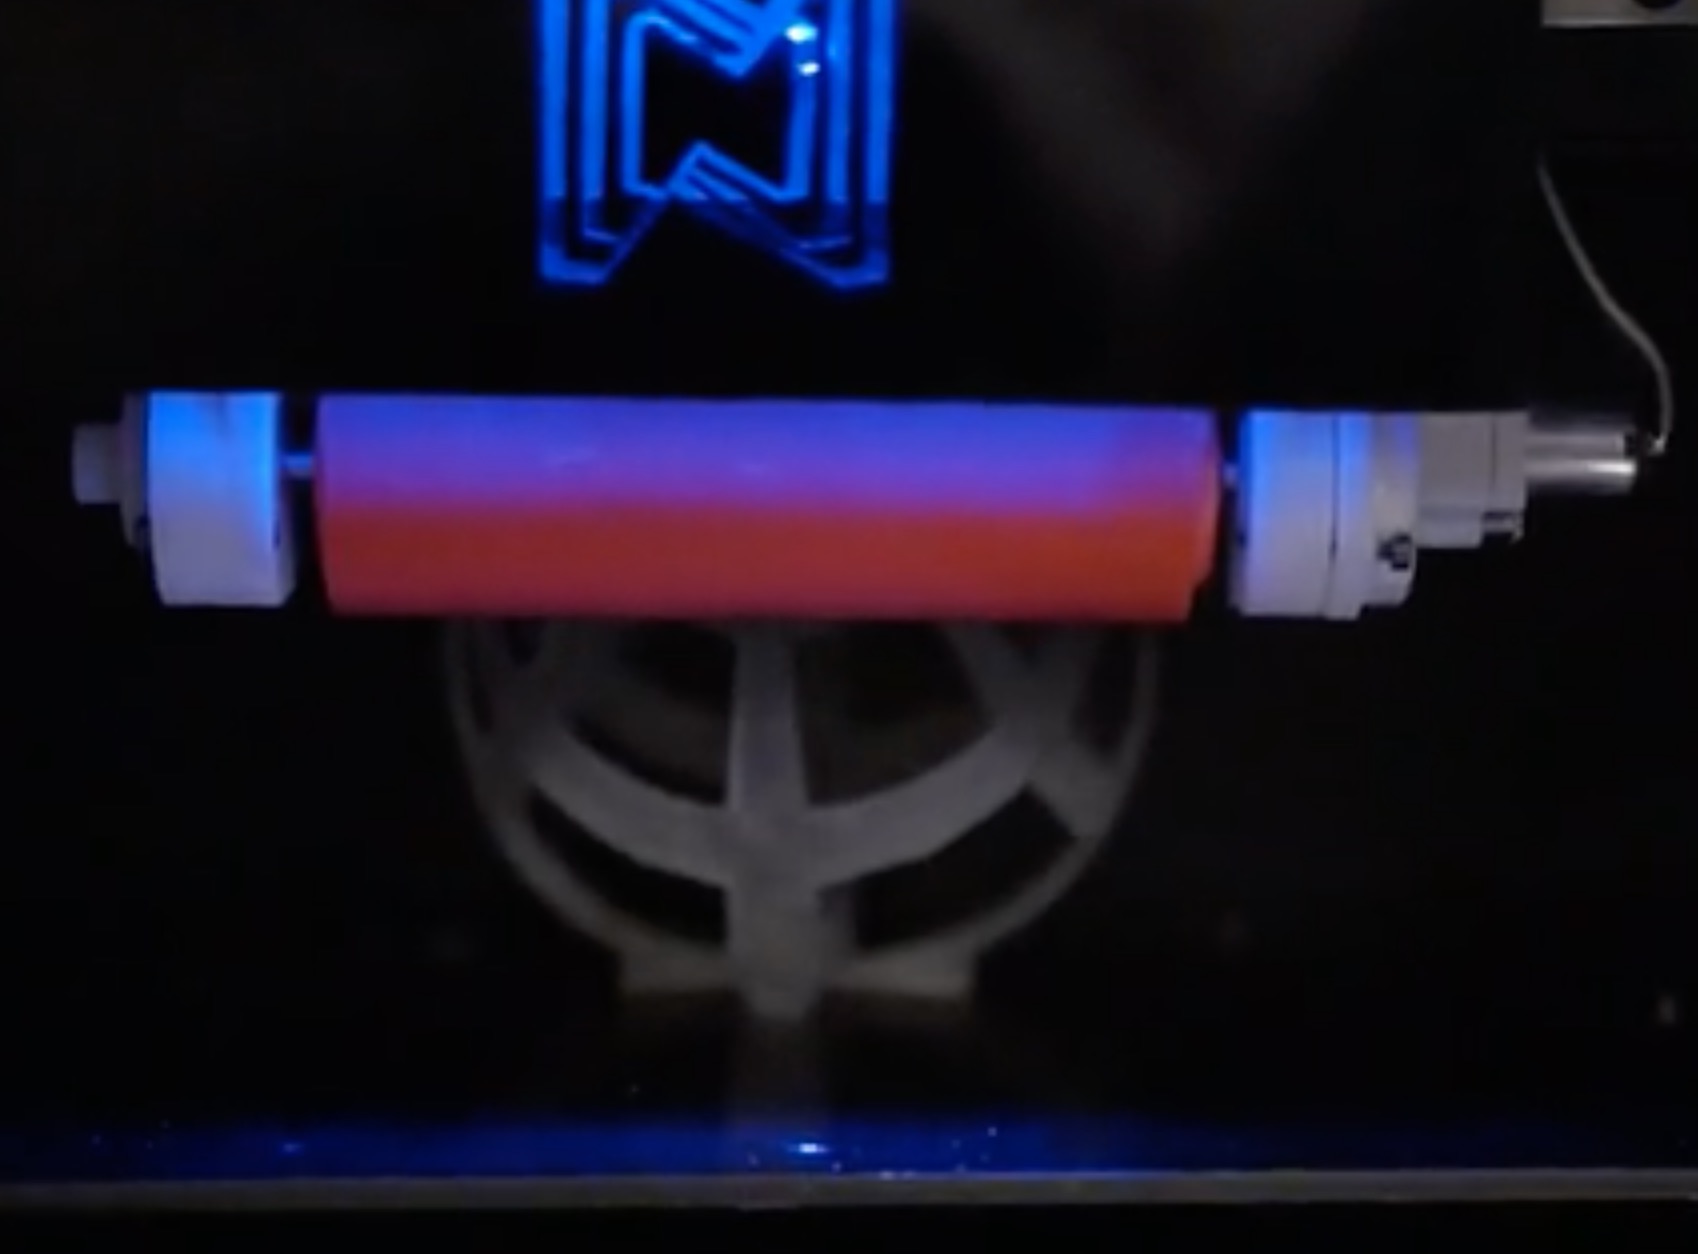  Still from a time lapse of 3D printing on the NexD1 